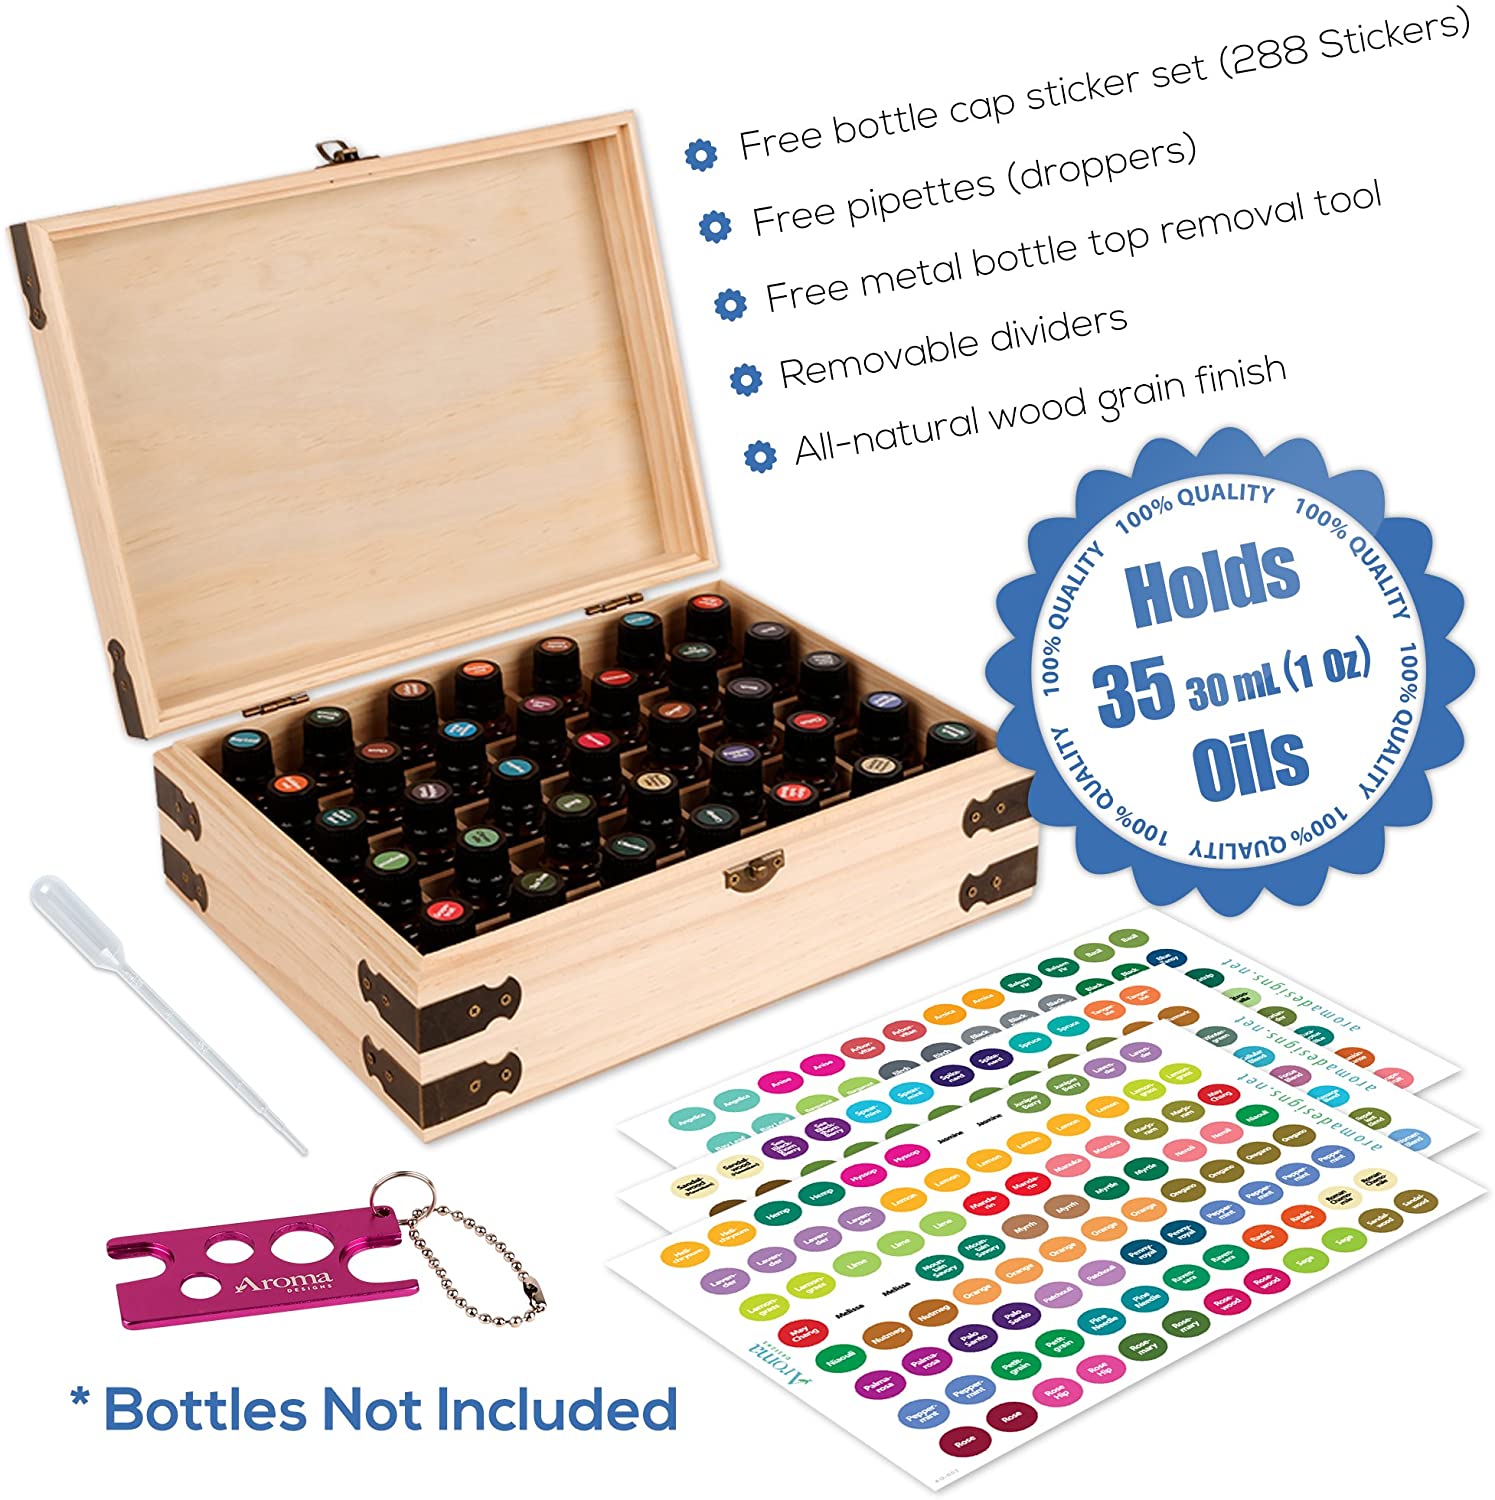 Pine Wood Essential Oil Box Organizer - Holds 35 30ml (1 oz) Bottles - Includes Labels and Bottle Top Removal Tool - Protect, Store, & Organize Pure Essential Oils